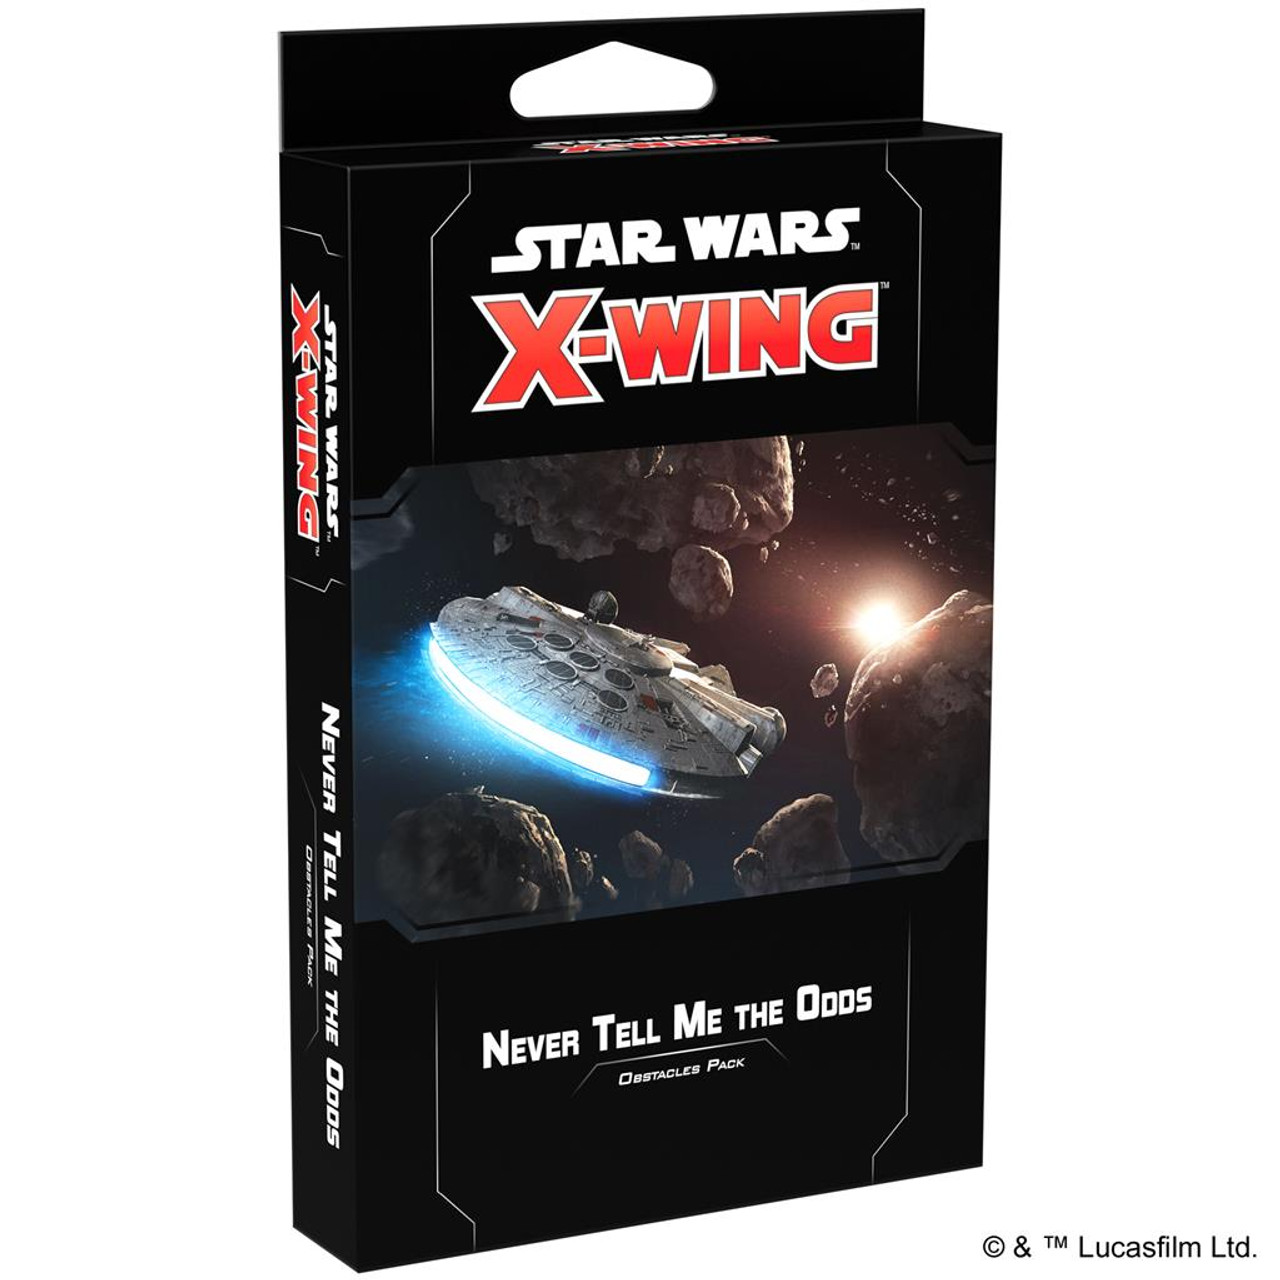 SWZ064 - STAR WARS X-WING: NEVER TELL ME THE ODDS OBSTACLES PACK